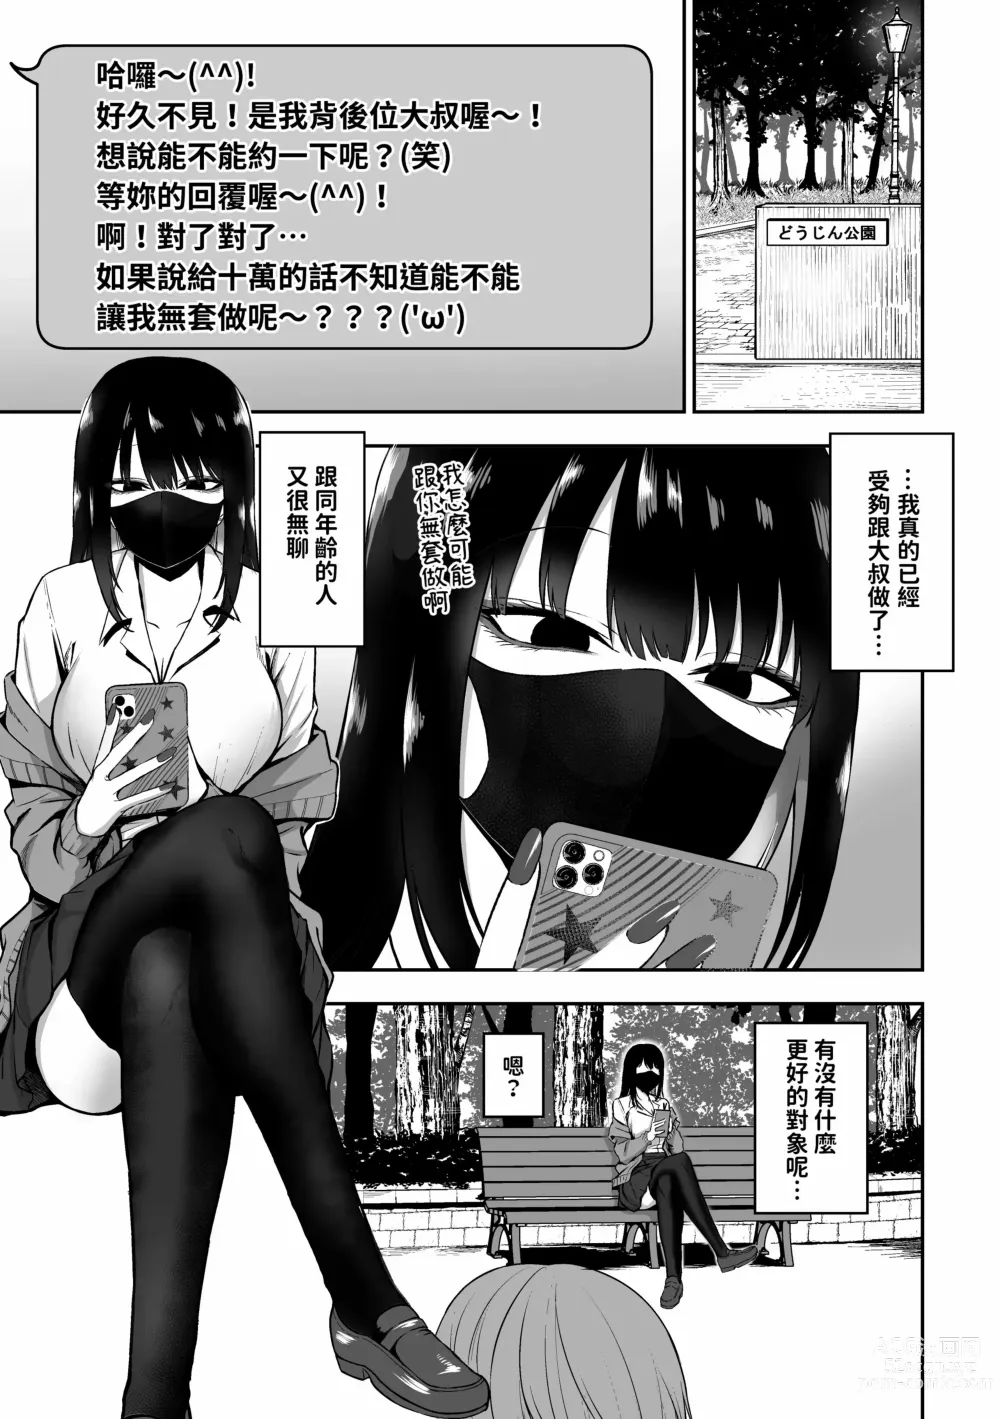 Page 2 of doujinshi 三食纳豆辣妹